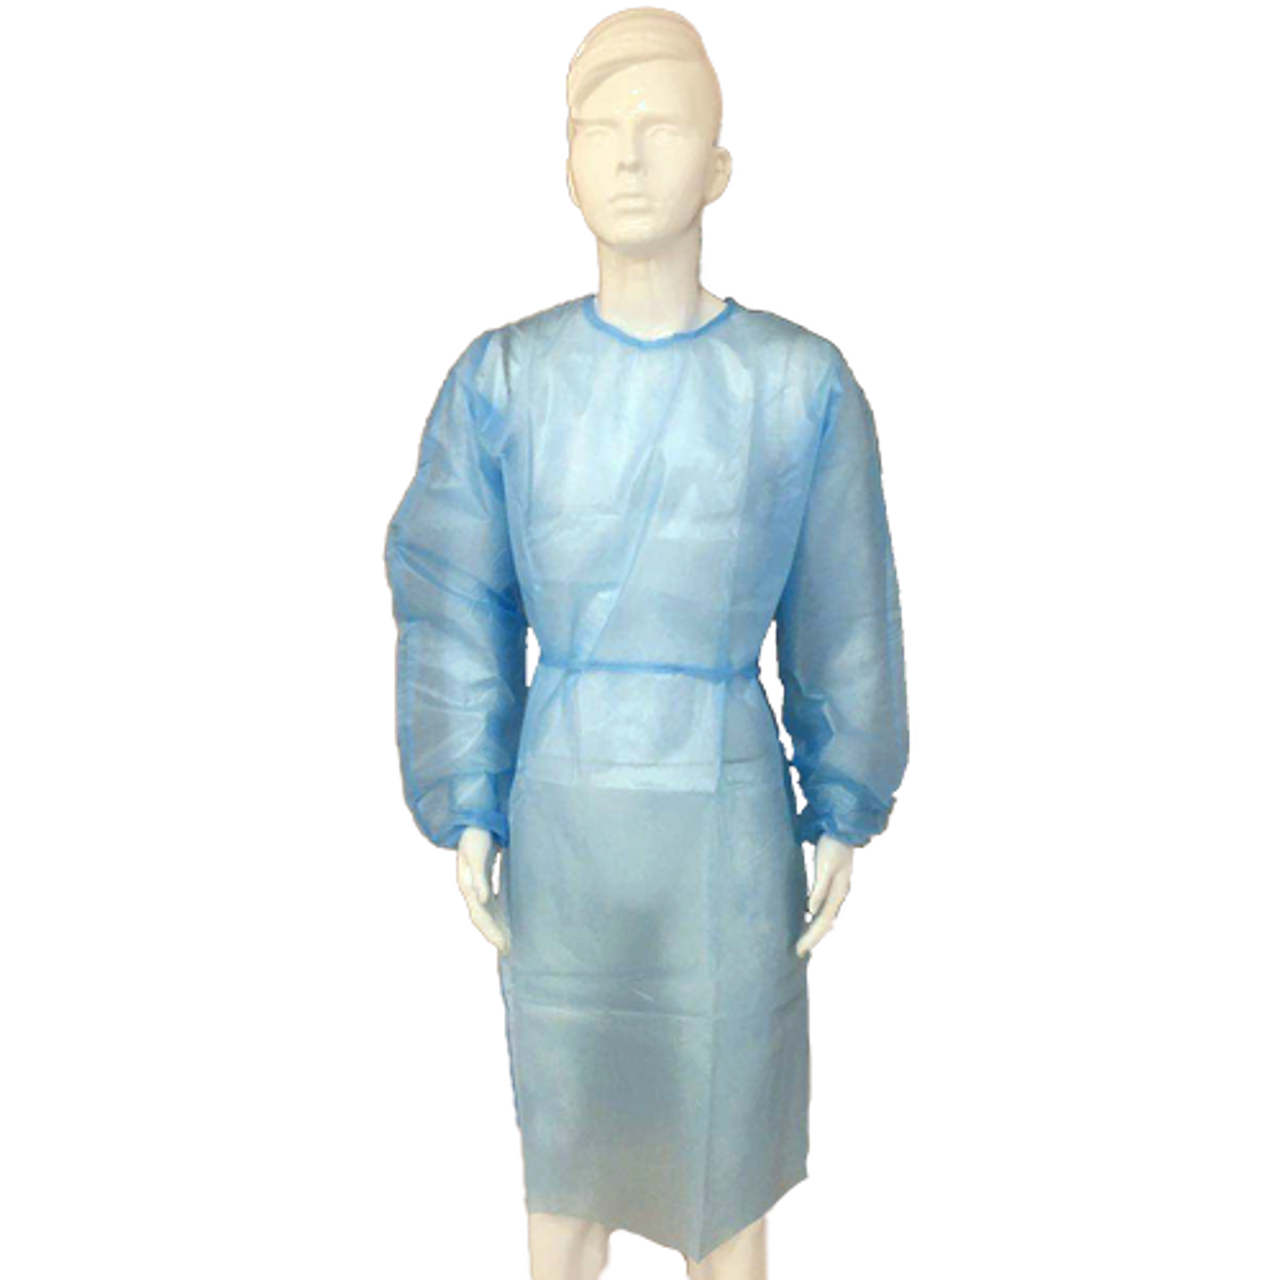 AAMI Level 3 Isolation Gown – Obex